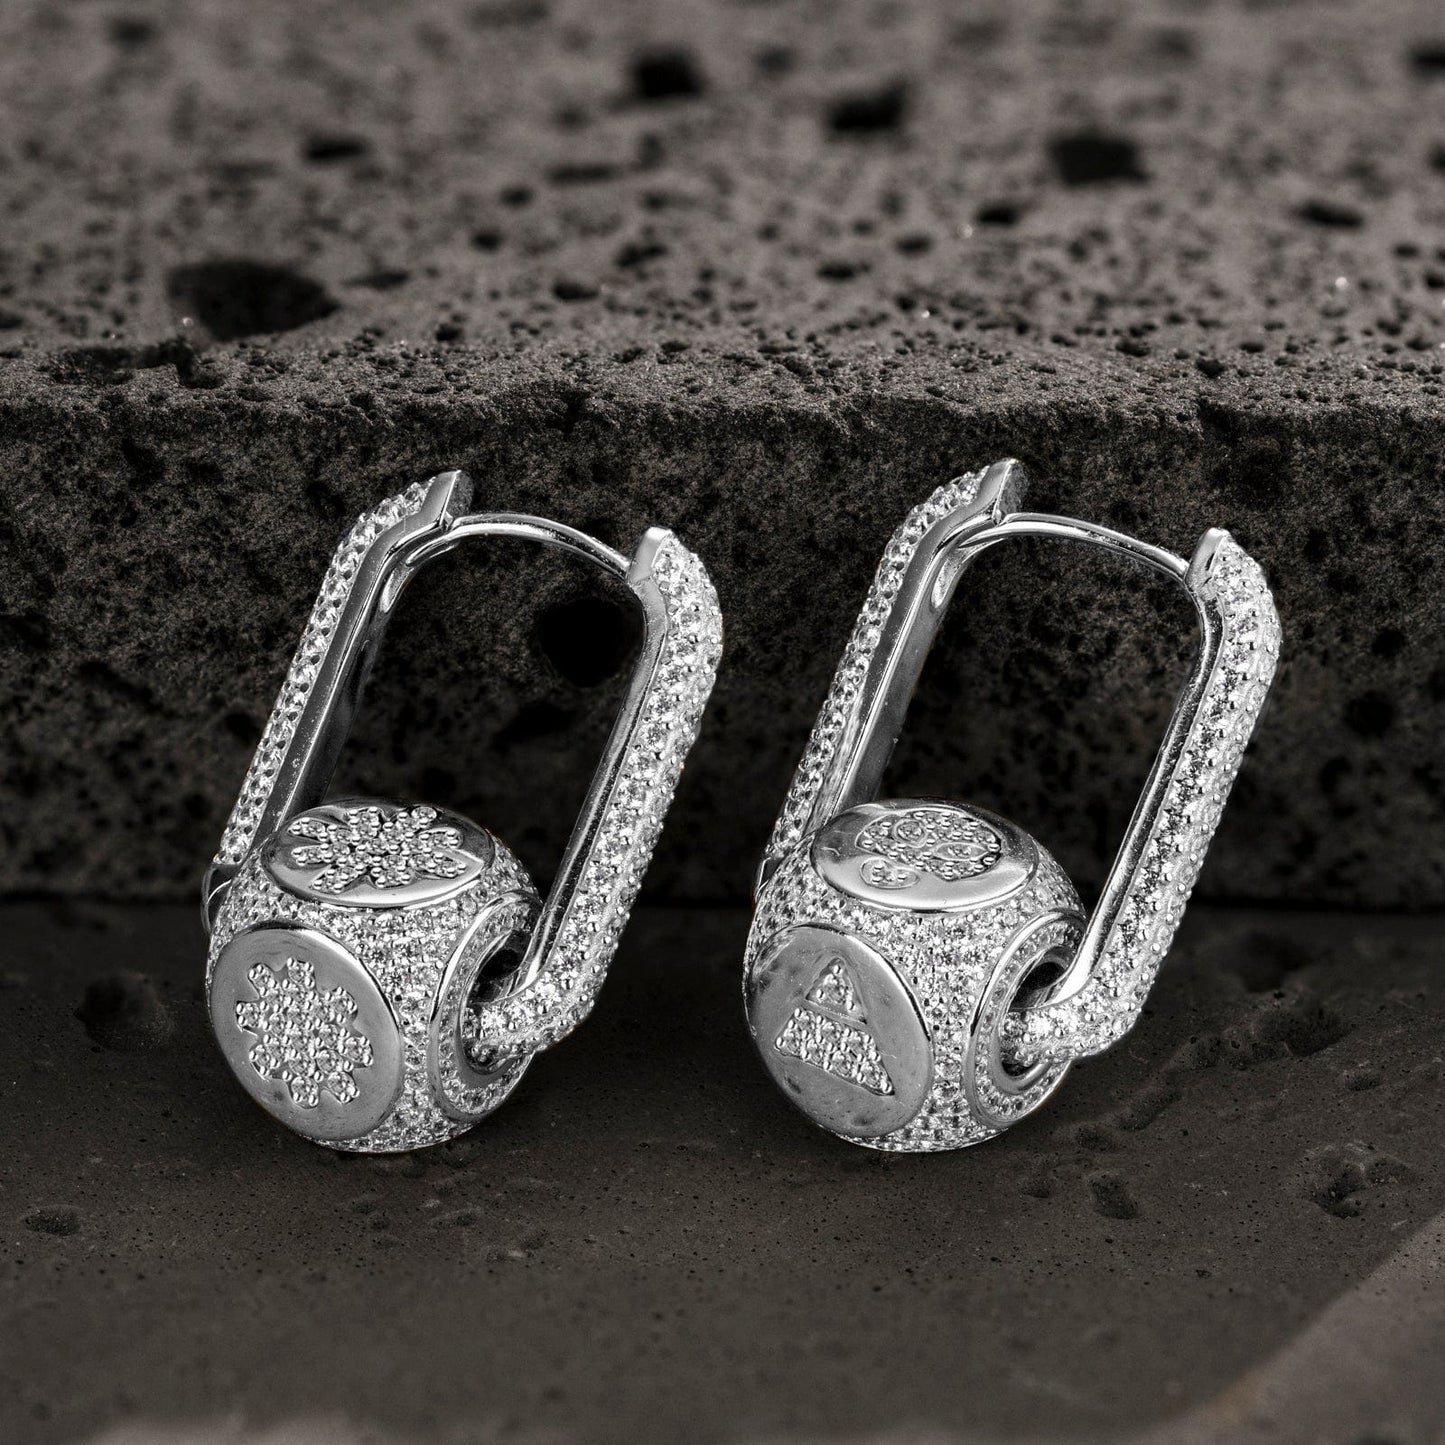 Robot and Light Tarnish-resistant Silver Charms Earrings Set with Sterling Silver Ear Post In White Gold Plated